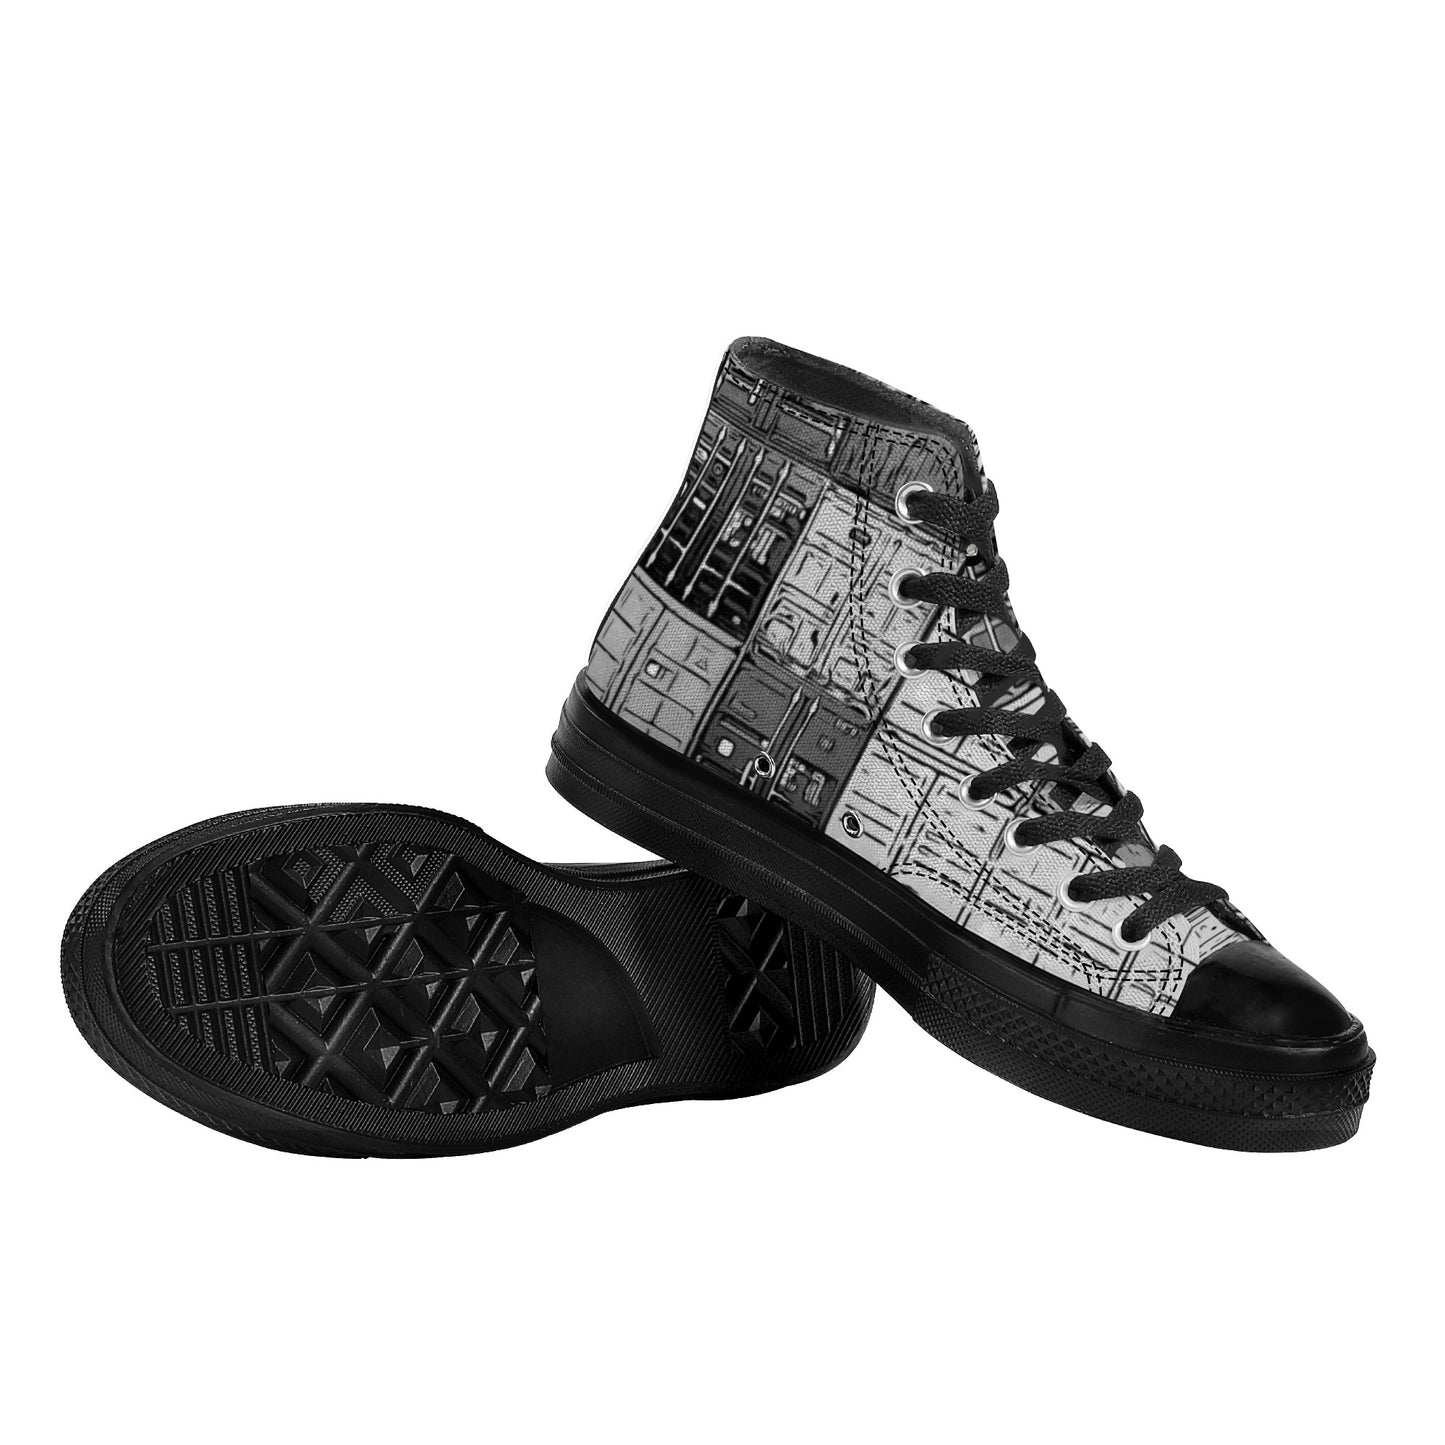 "Mono Shipping Containers" High Top Canvas Shoes